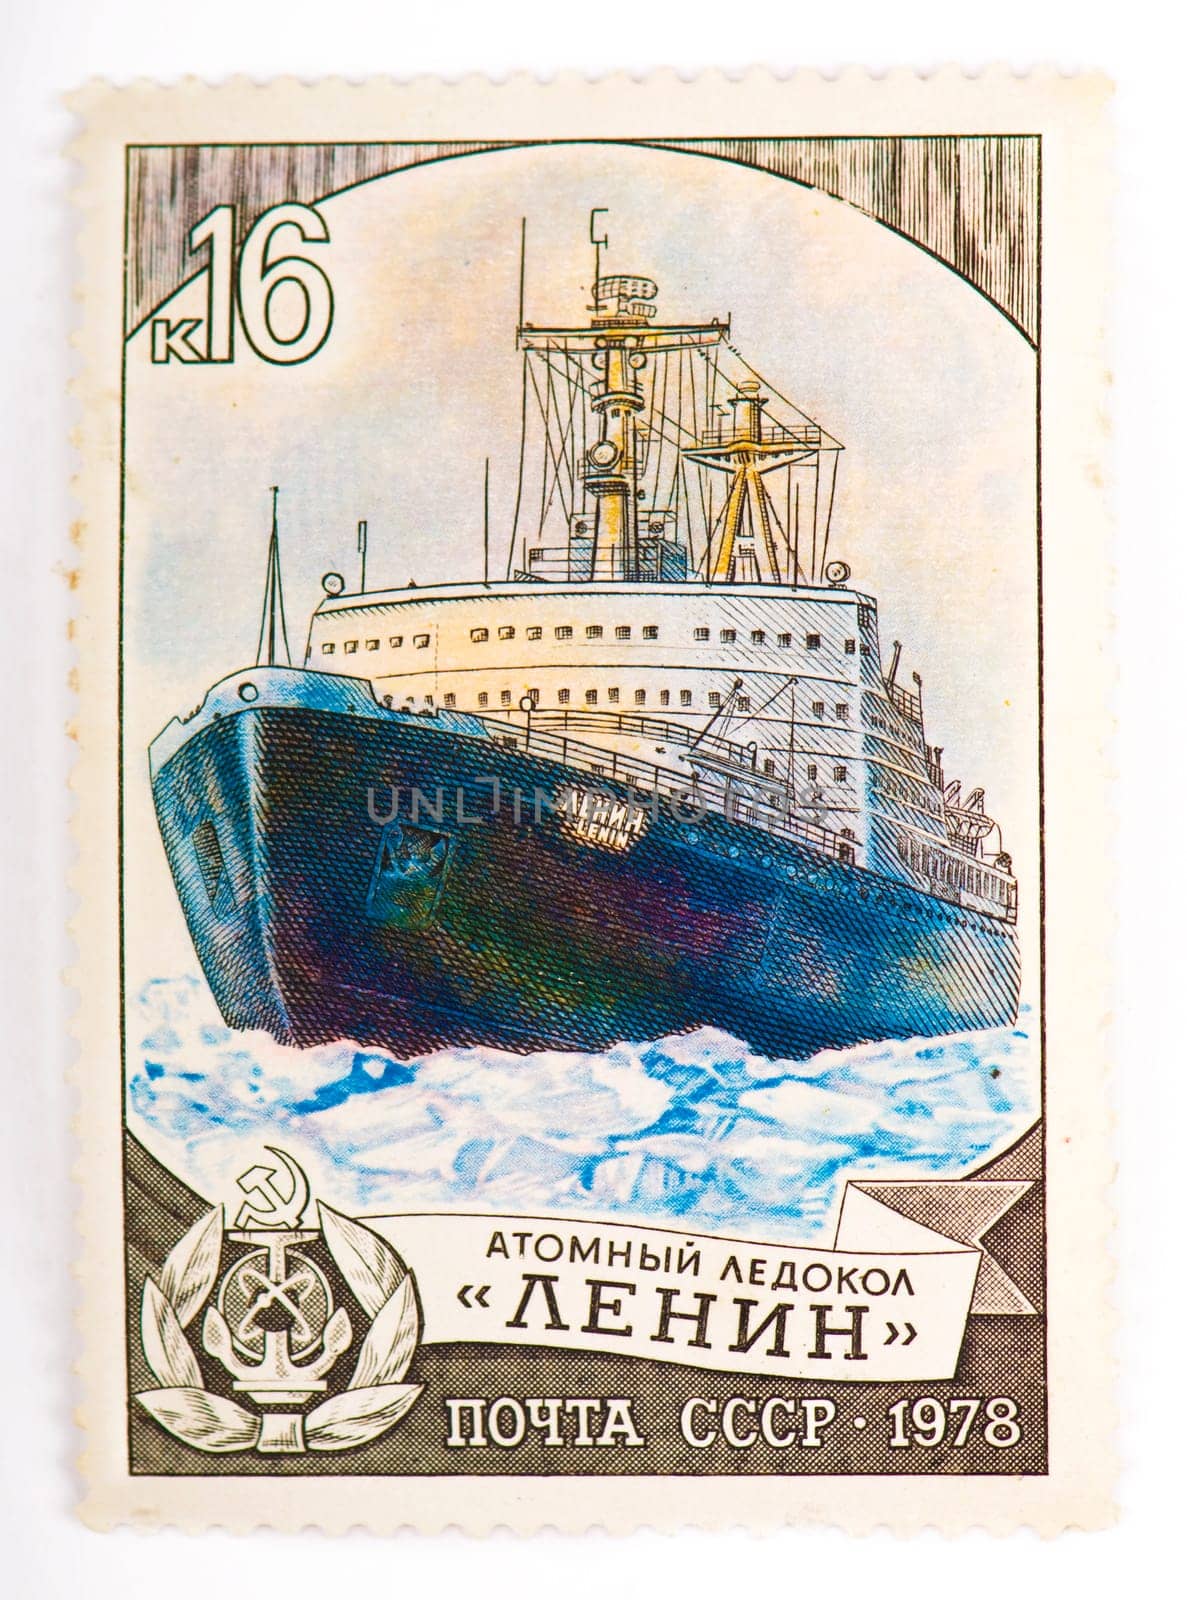 USSR-CIRCA 1978: A stamp printed in USSR shows nuclear icebreaker Lenin , circa 1978